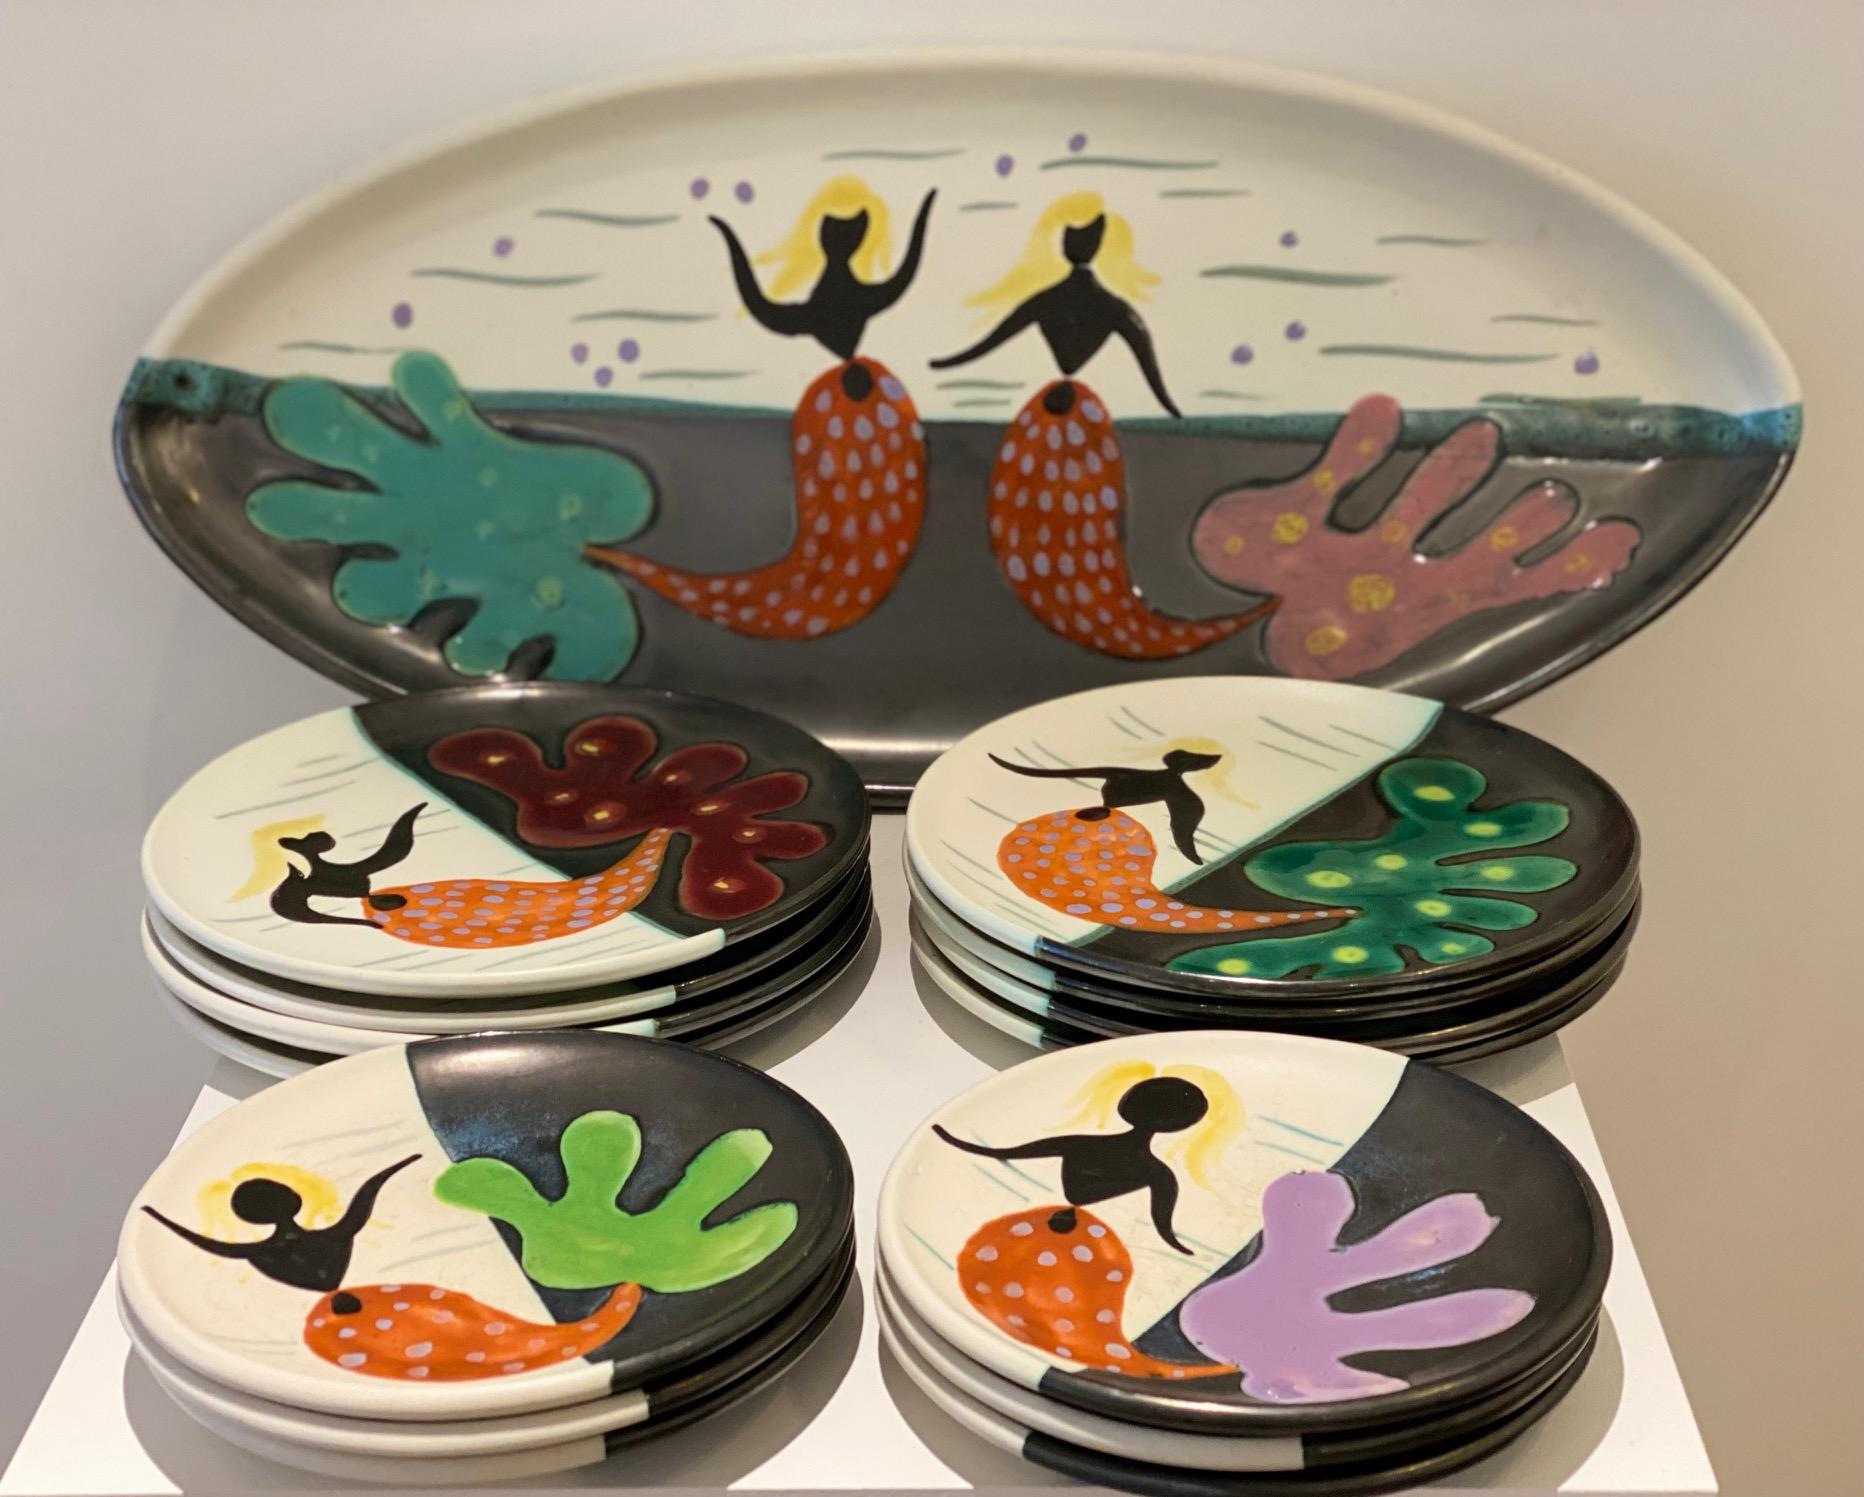 Unusual table service :
6 ceramic plates diameter 18 cm
8 ceramic plates diameter 22 cm
1 Large ceramic dish 
1 ceramic sauce boat
All hand decorated with Mermaids by Atelier Cerenne in Vallauris 1960's.
Atelier Cerenne was a famous ceramic workshop